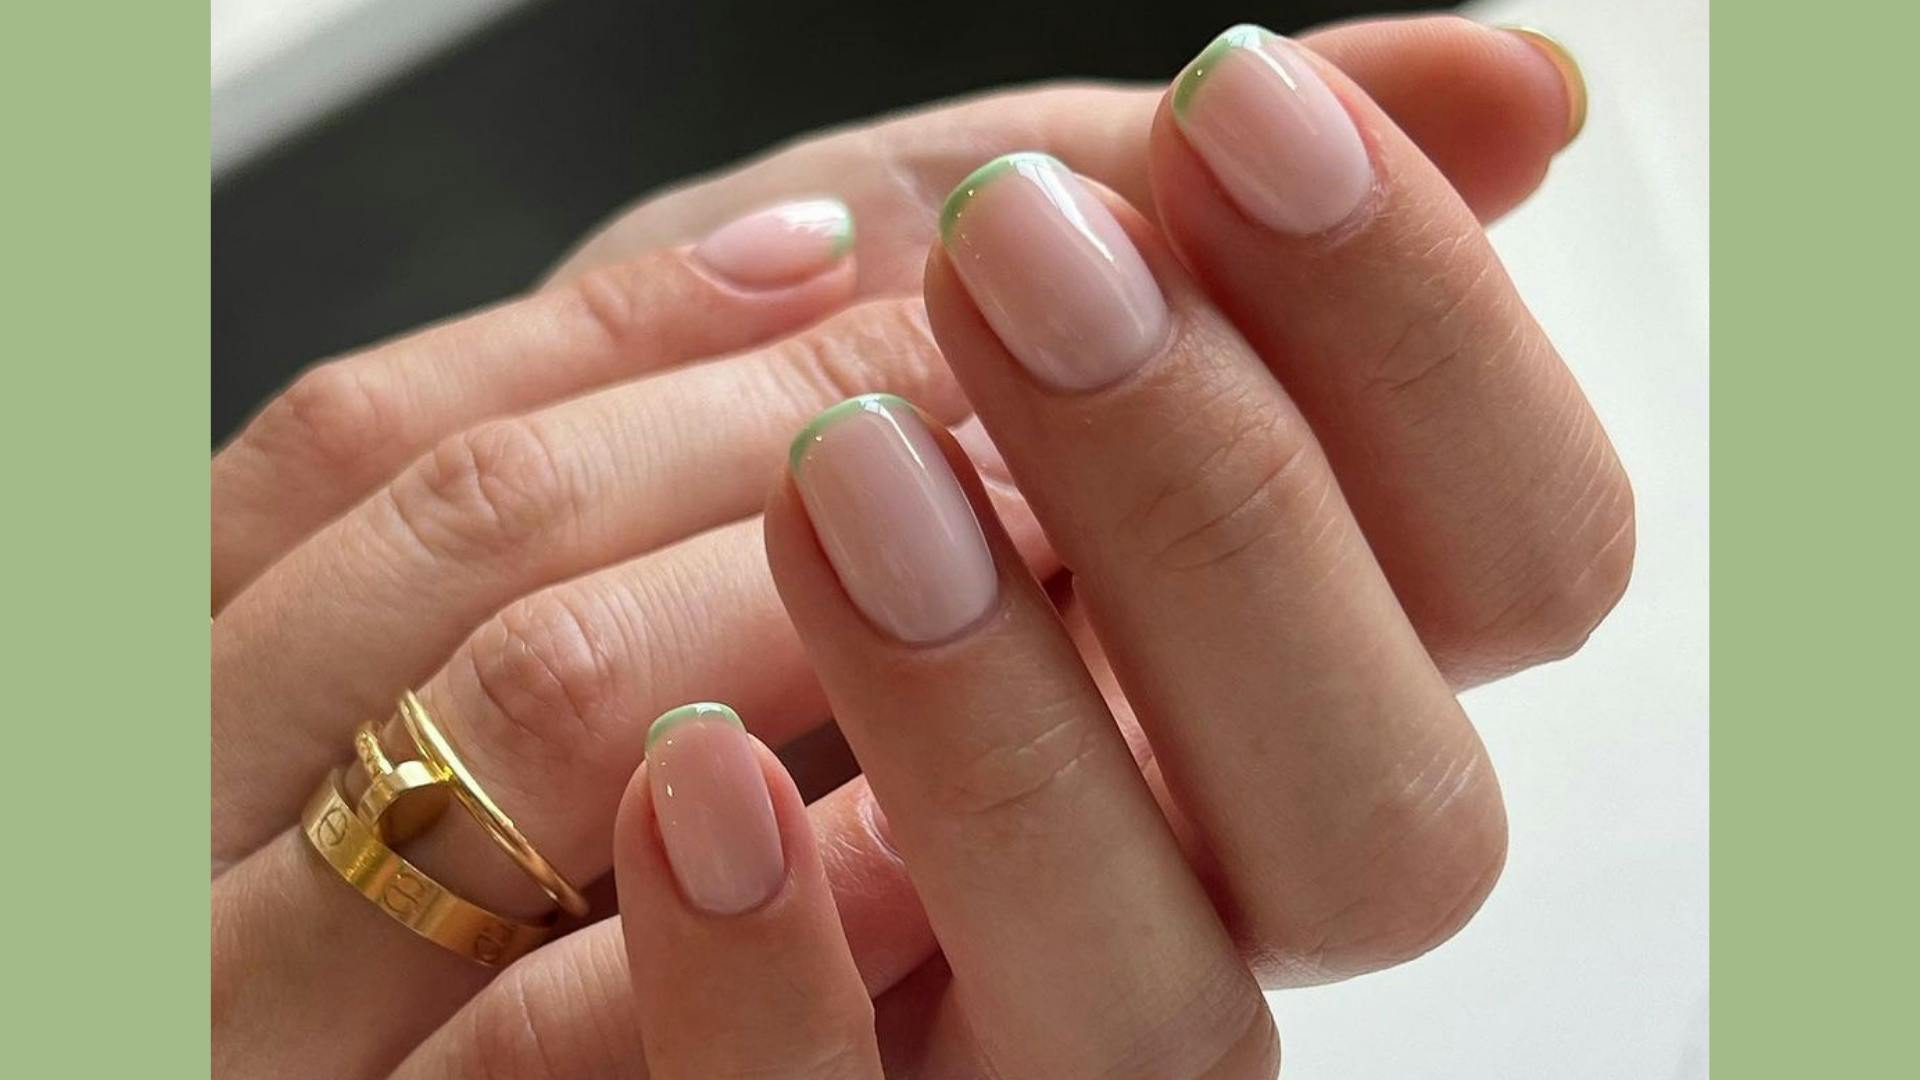 Pastel tip nails: 10 ideas to inspire you this spring | HELLO!